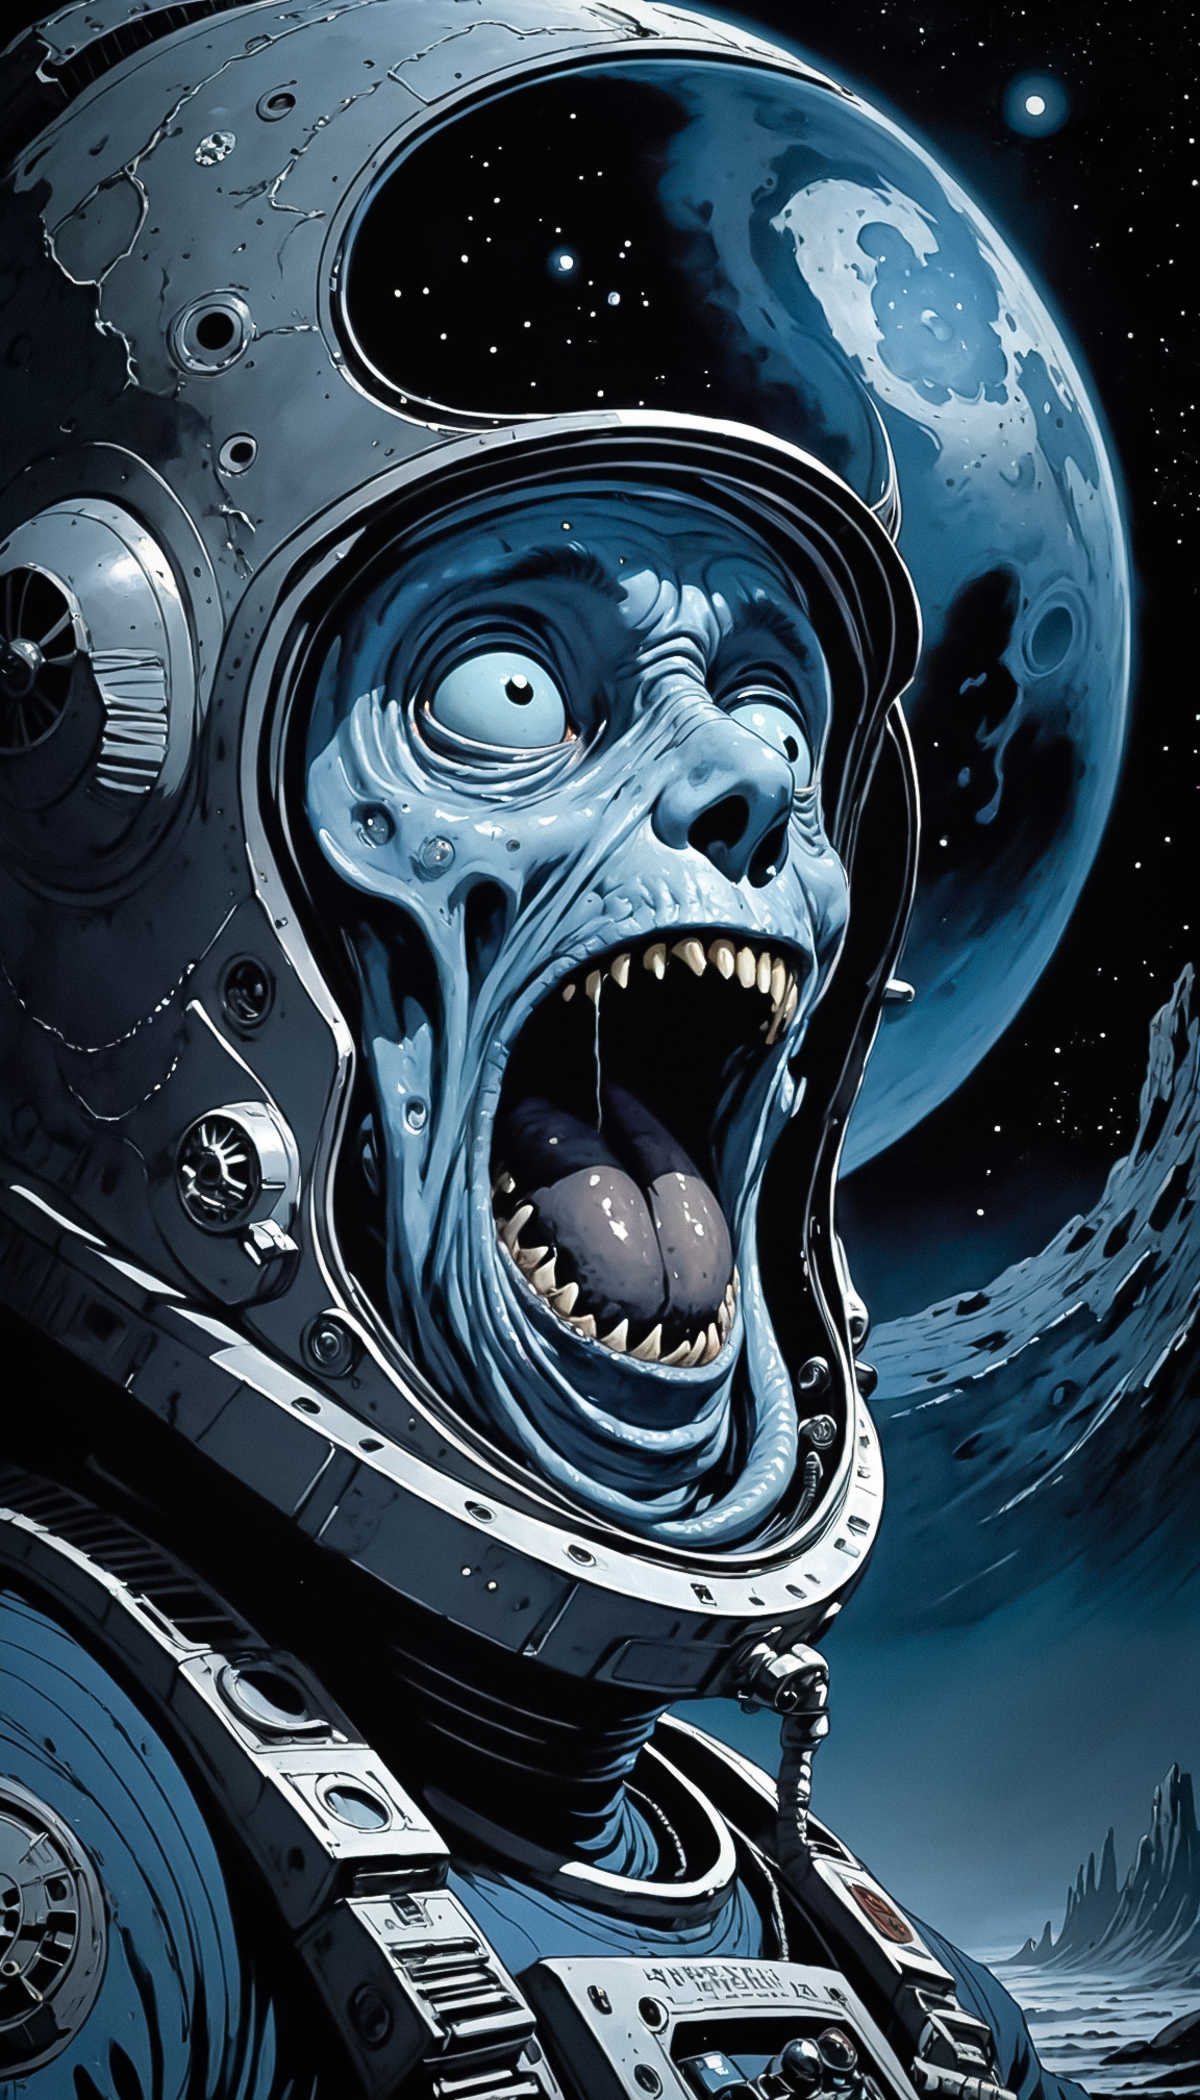 Space Astronaut with a Large Open Mouth and Screaming Expression